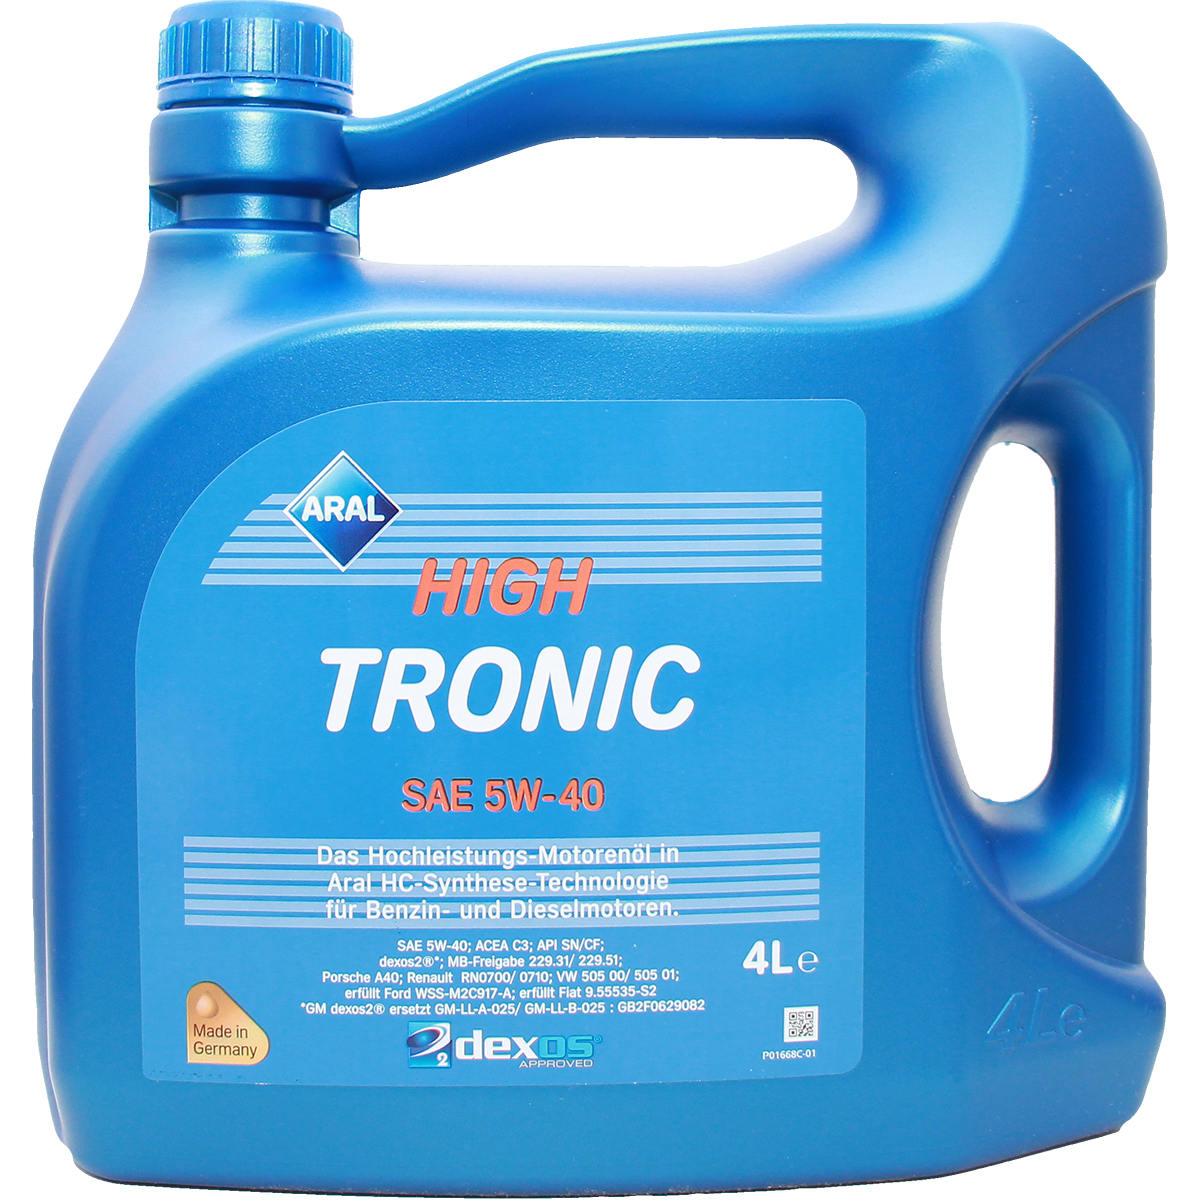 Aral HighTronic 5W-40 4+1 Liter